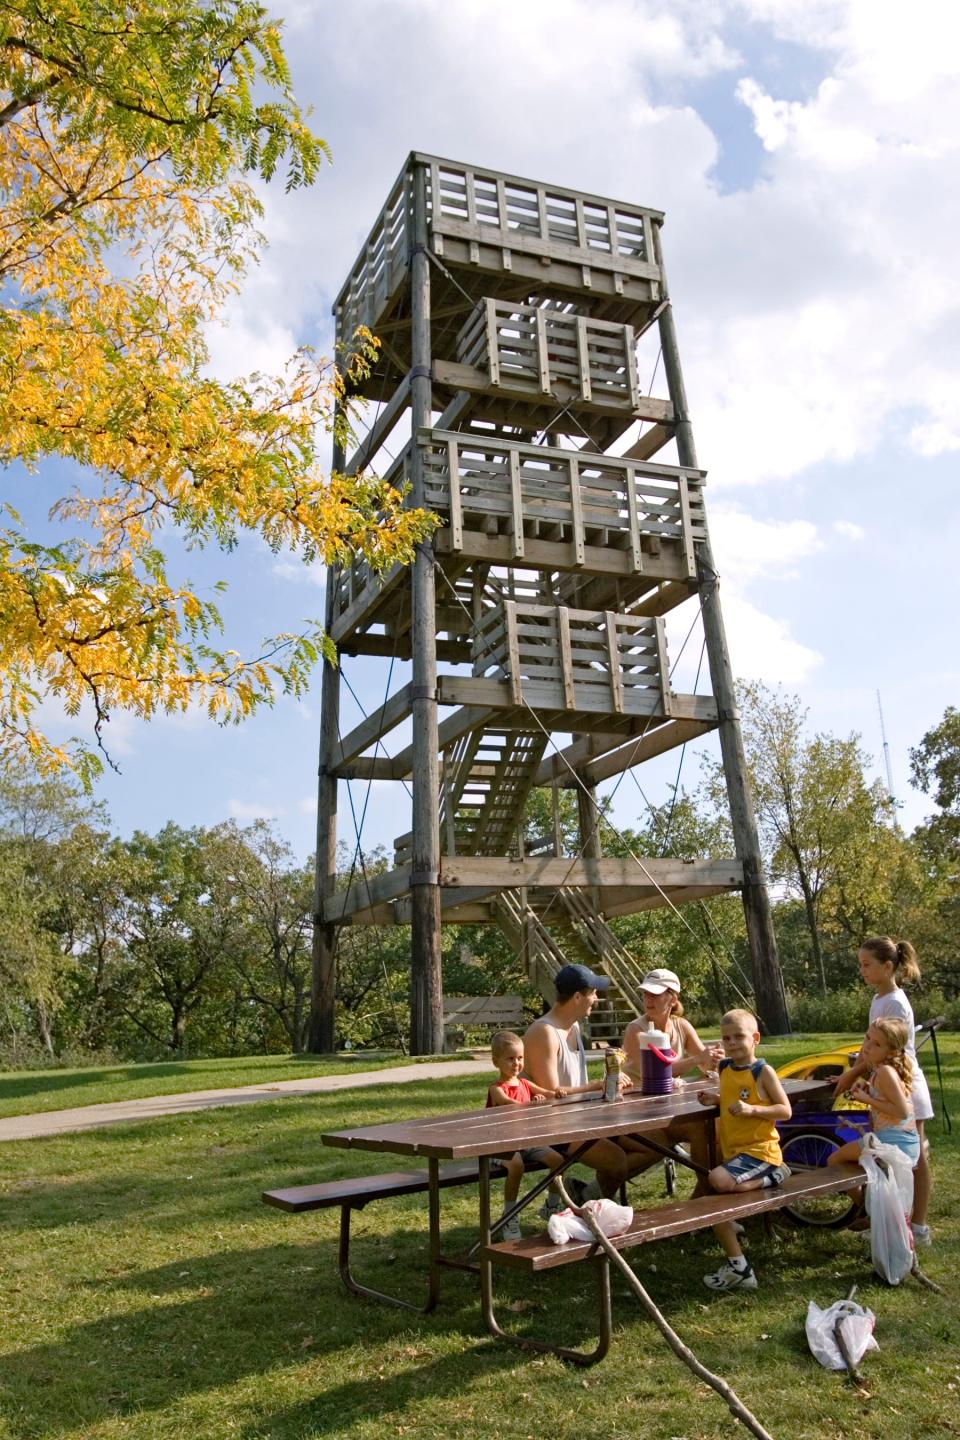 In this Journal Sentinel file photo, the Rosencrans family of Pewaukee enjoy a picnic beneath the observatory tower at Lapham Peak State Park. The park offers plenty of trails and the 45-foot tower as opportunities to seek out beautiful fall foliage.